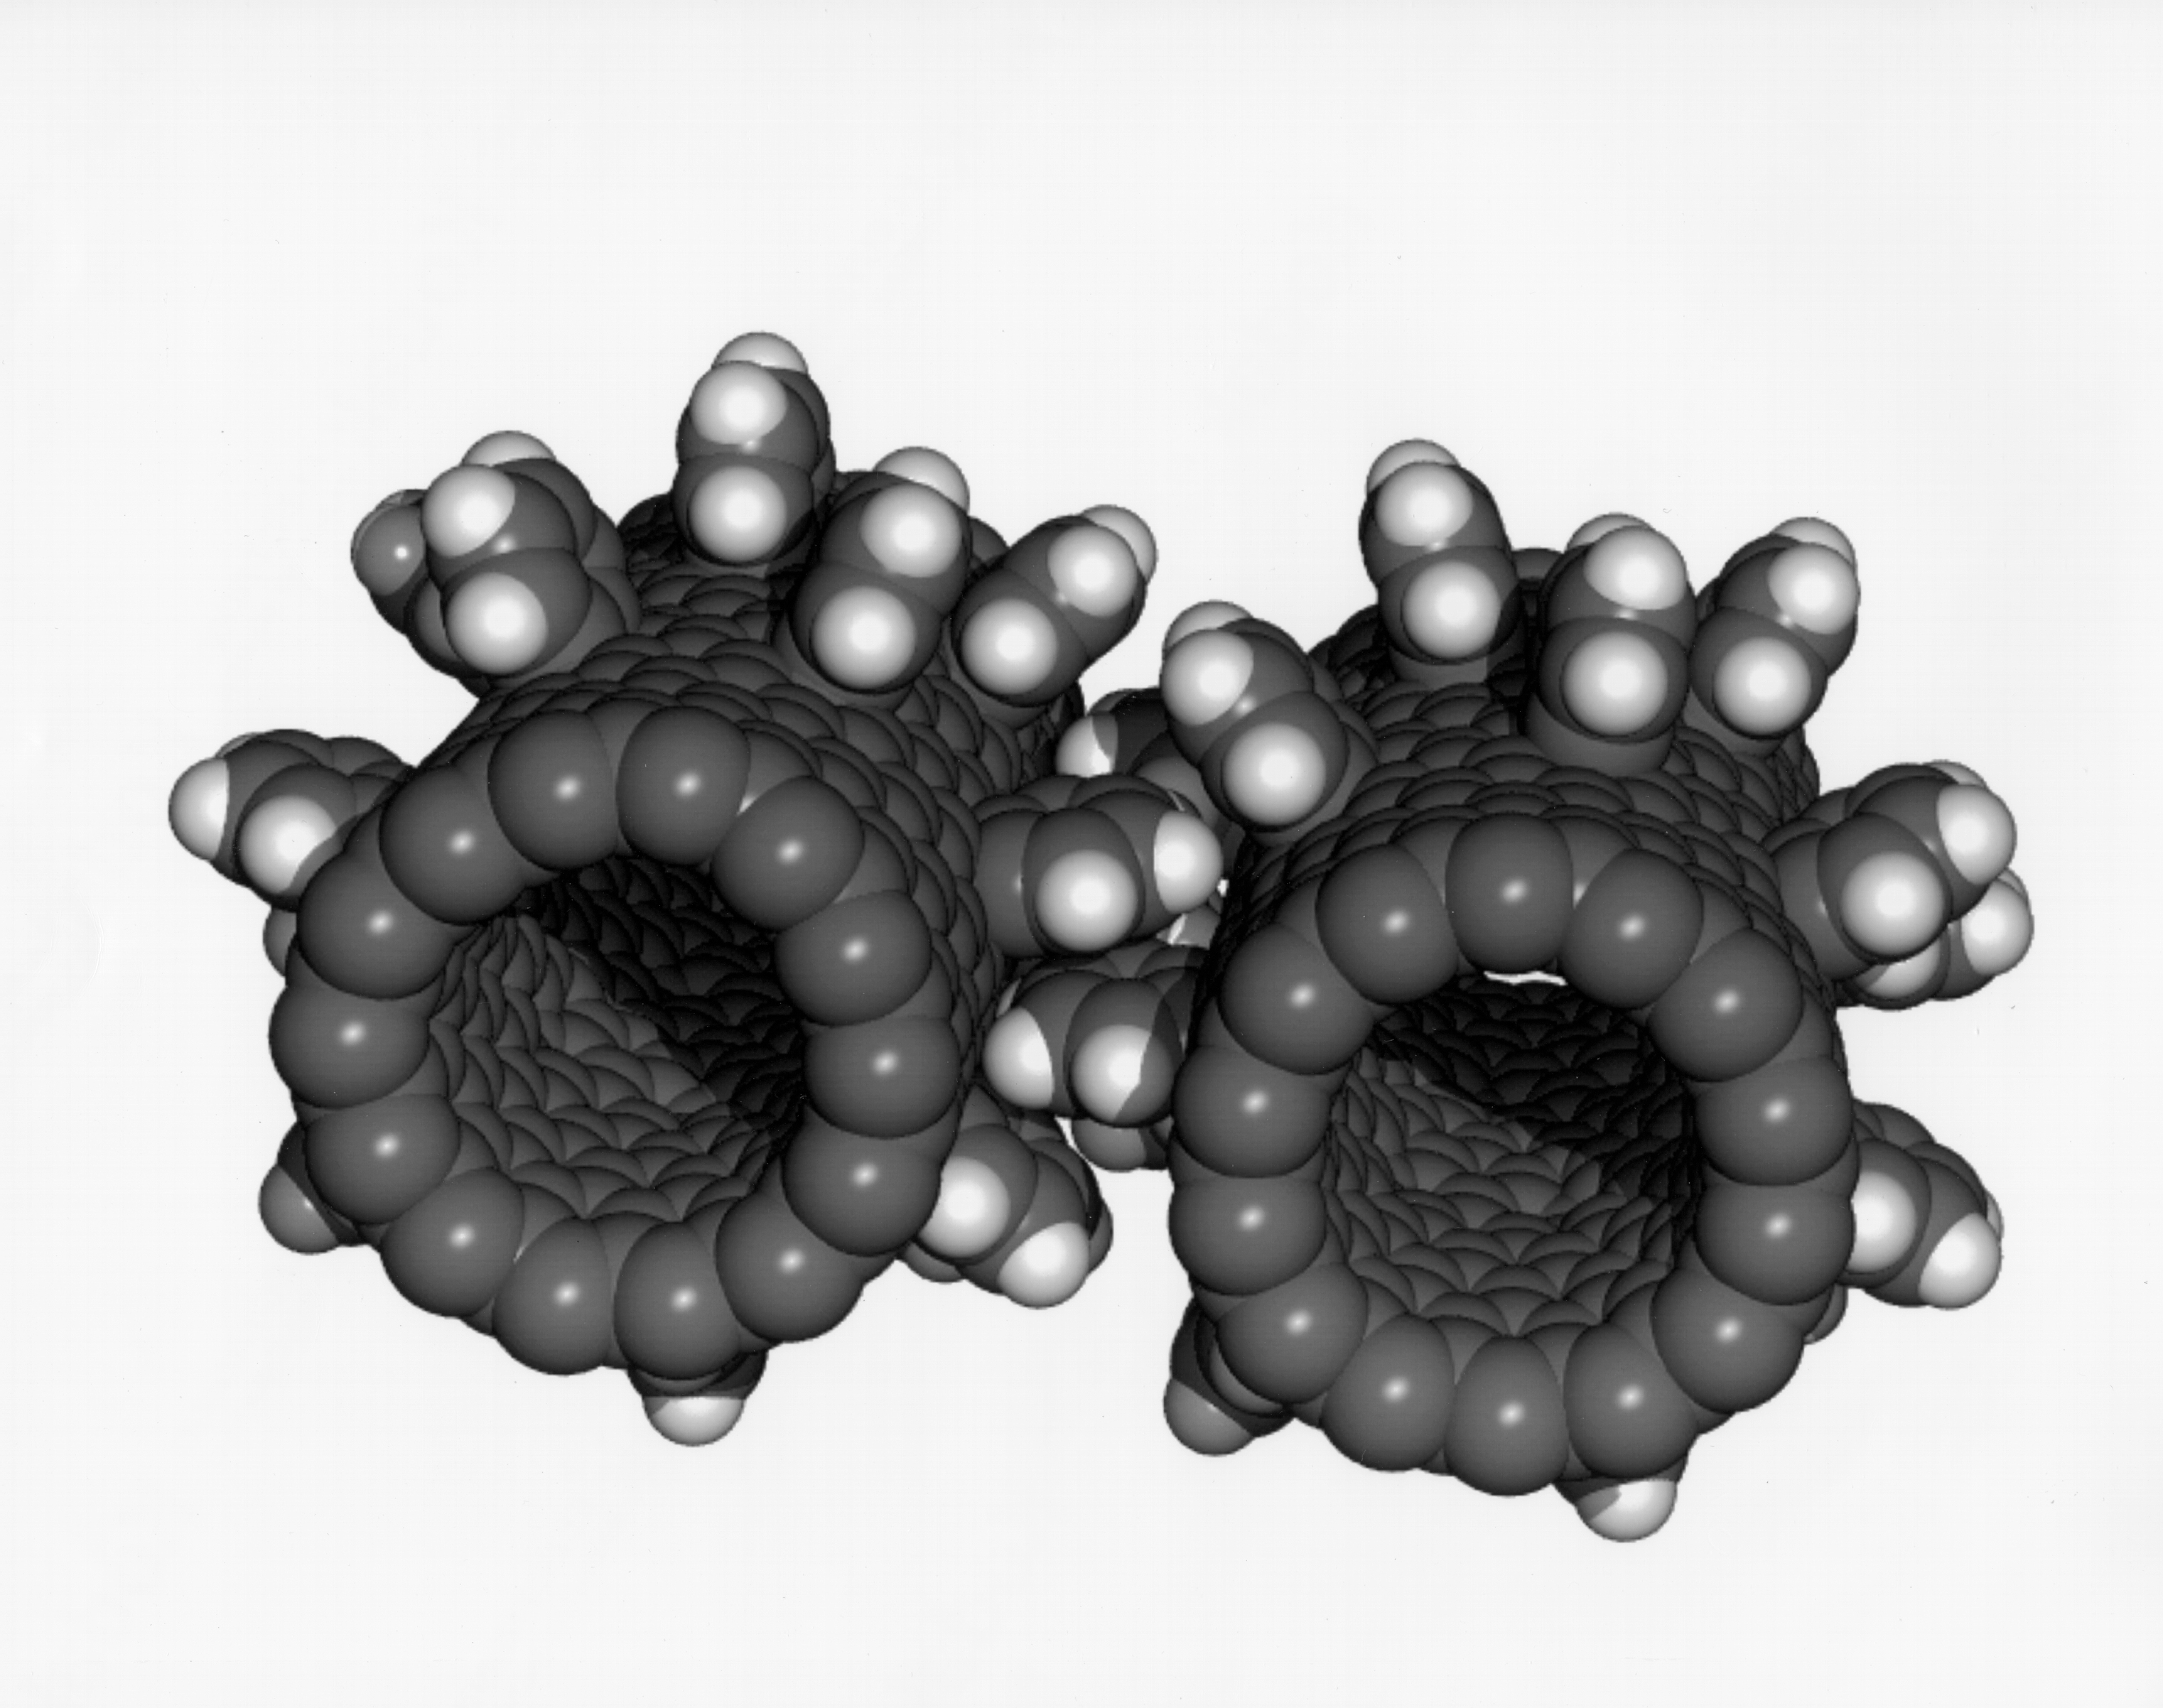 These nanogears were visualized by NASA back in the mid 90s. The idea (back then) was to allow these particles to have independent functions, such as working gear sets.